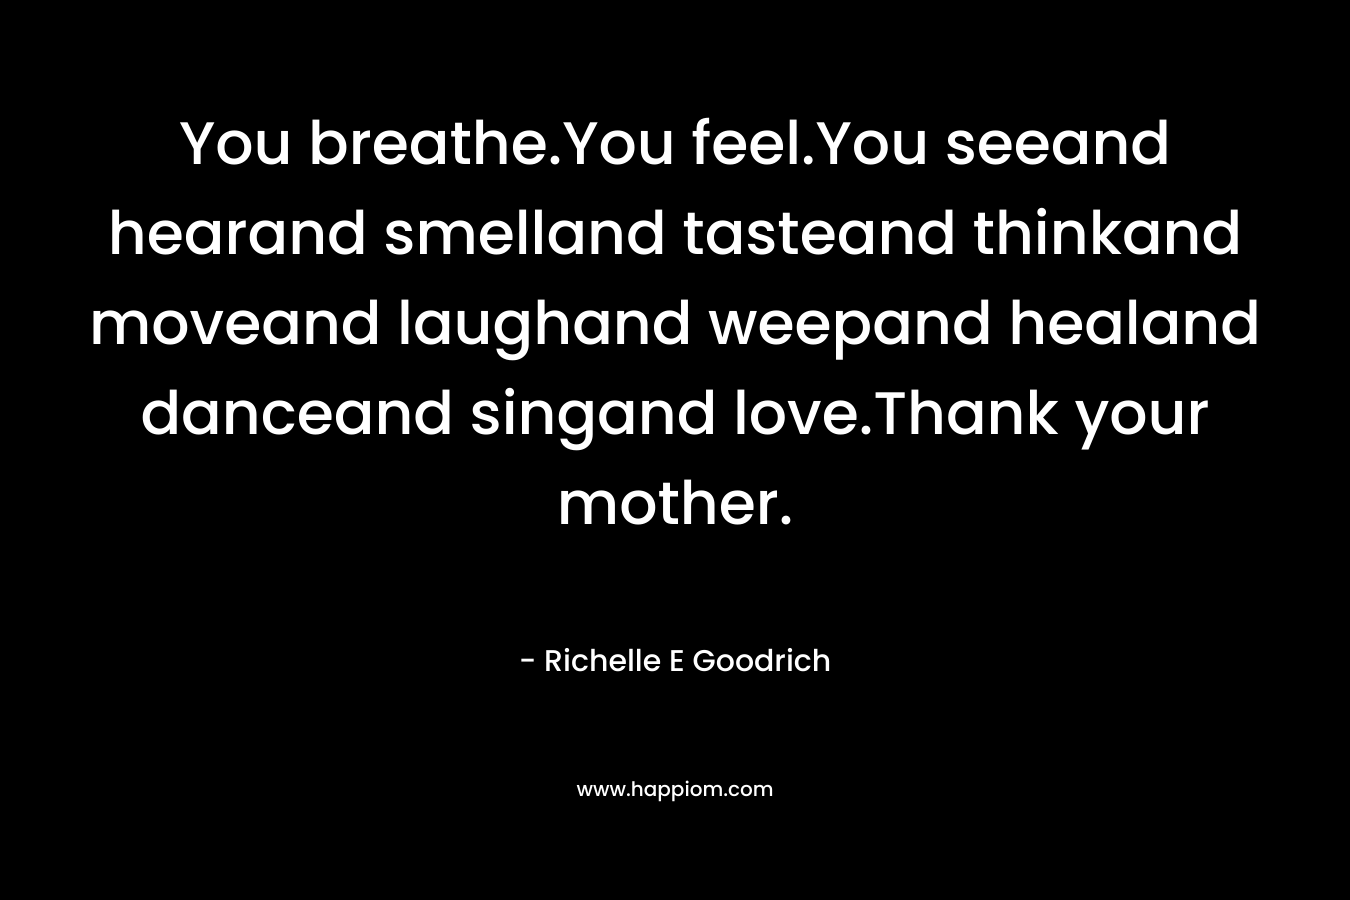 You breathe.You feel.You seeand hearand smelland tasteand thinkand moveand laughand weepand healand danceand singand love.Thank your mother.